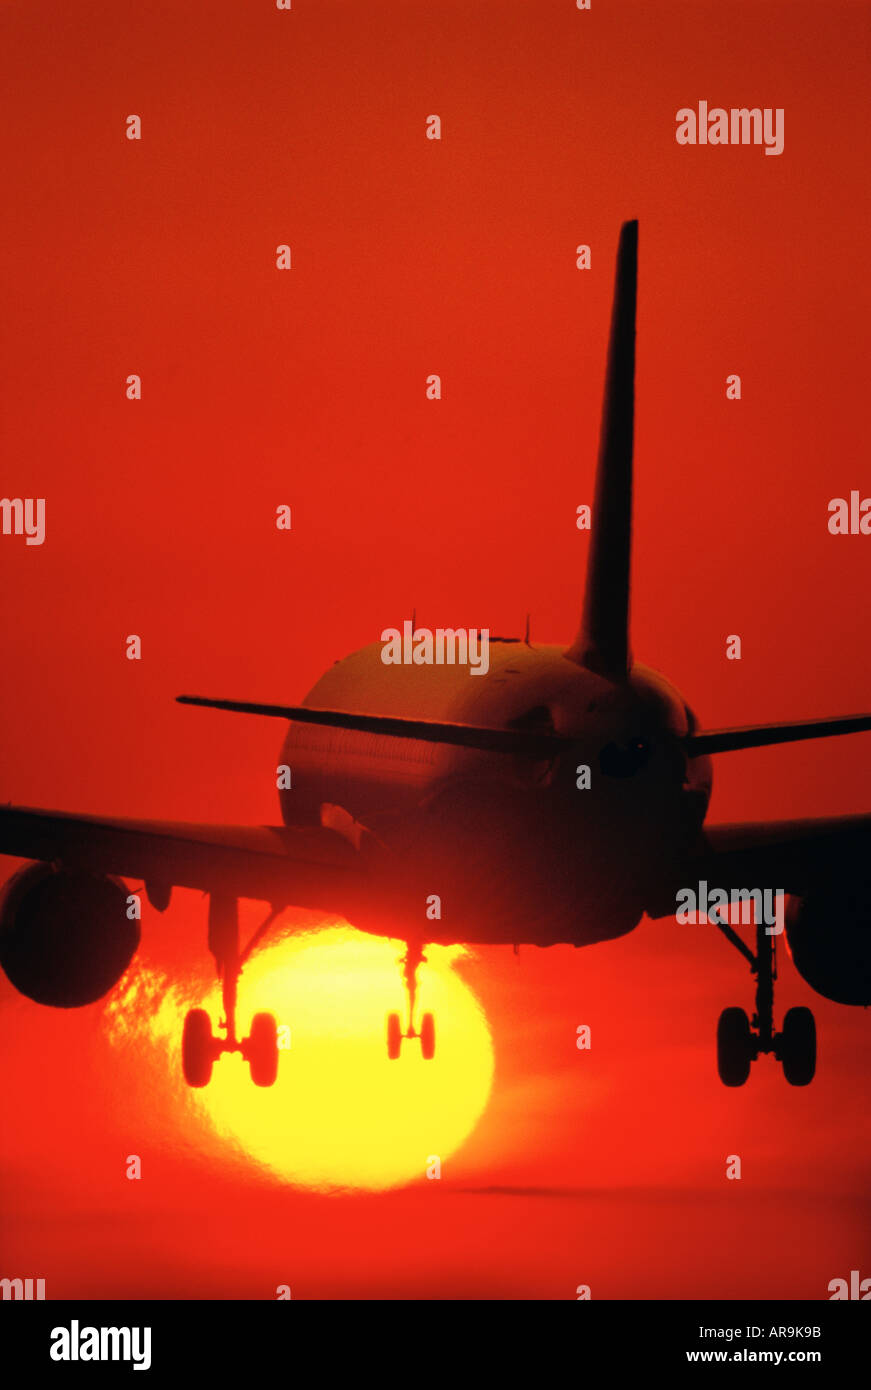 Airbus A320 jet airliner take off landing into sunset sunrise dusk undercarriage down jet thrust exhaust pollution silhouette Stock Photo